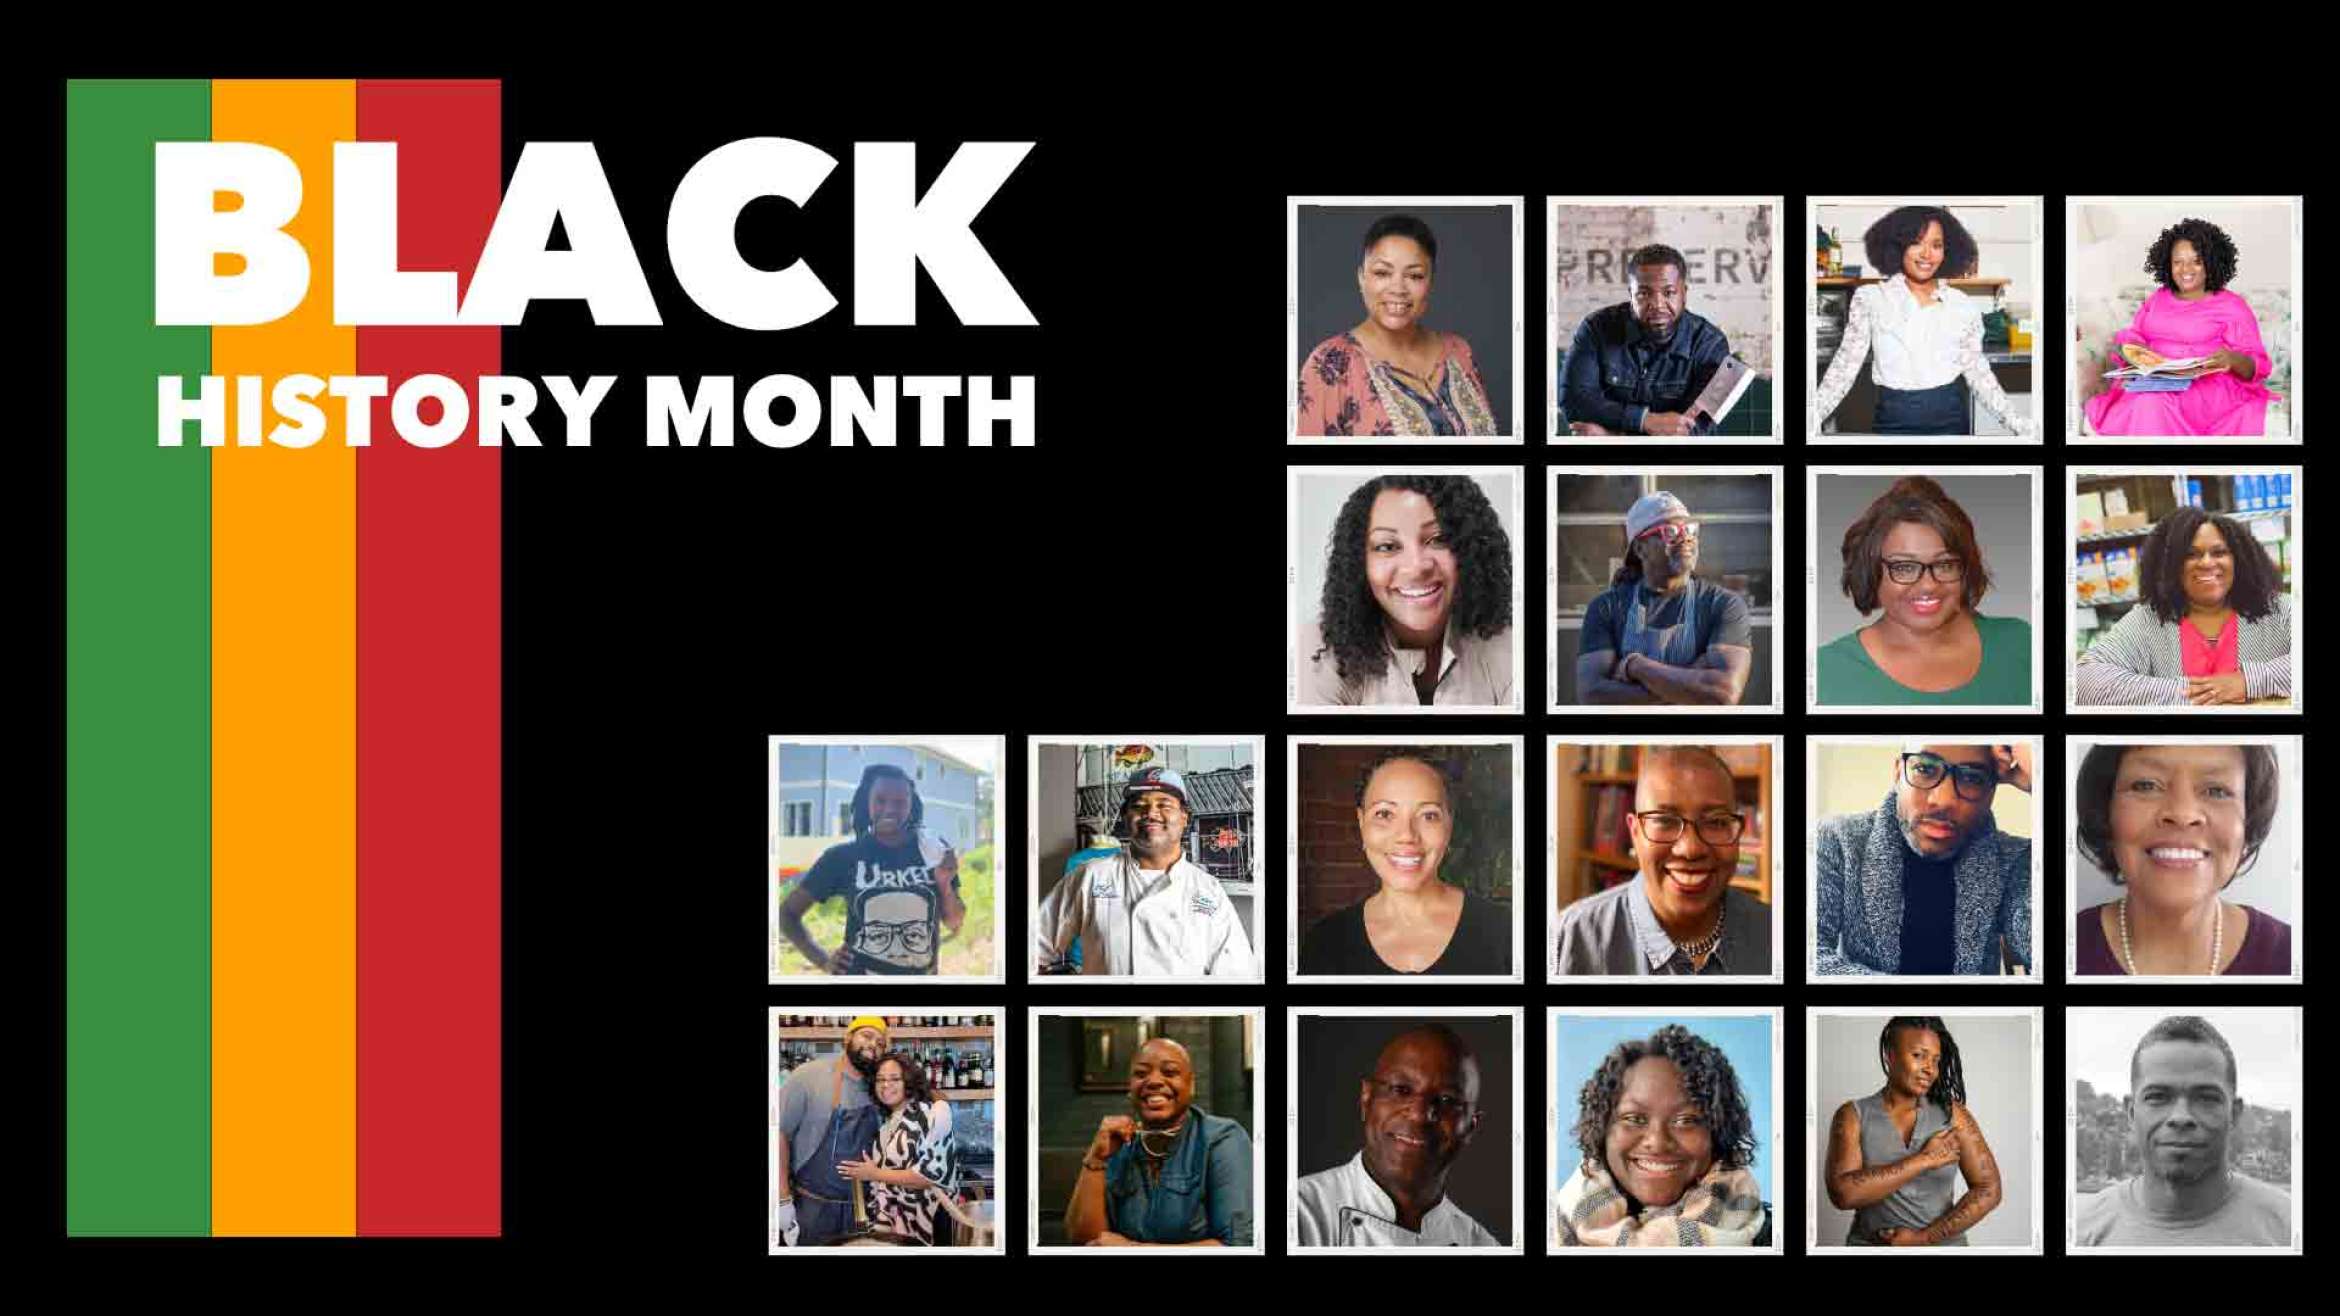 black background with green, yellow and red stripes down the left. Black History Month in white letters is written on top of them. There are 20 square images of black people on the right